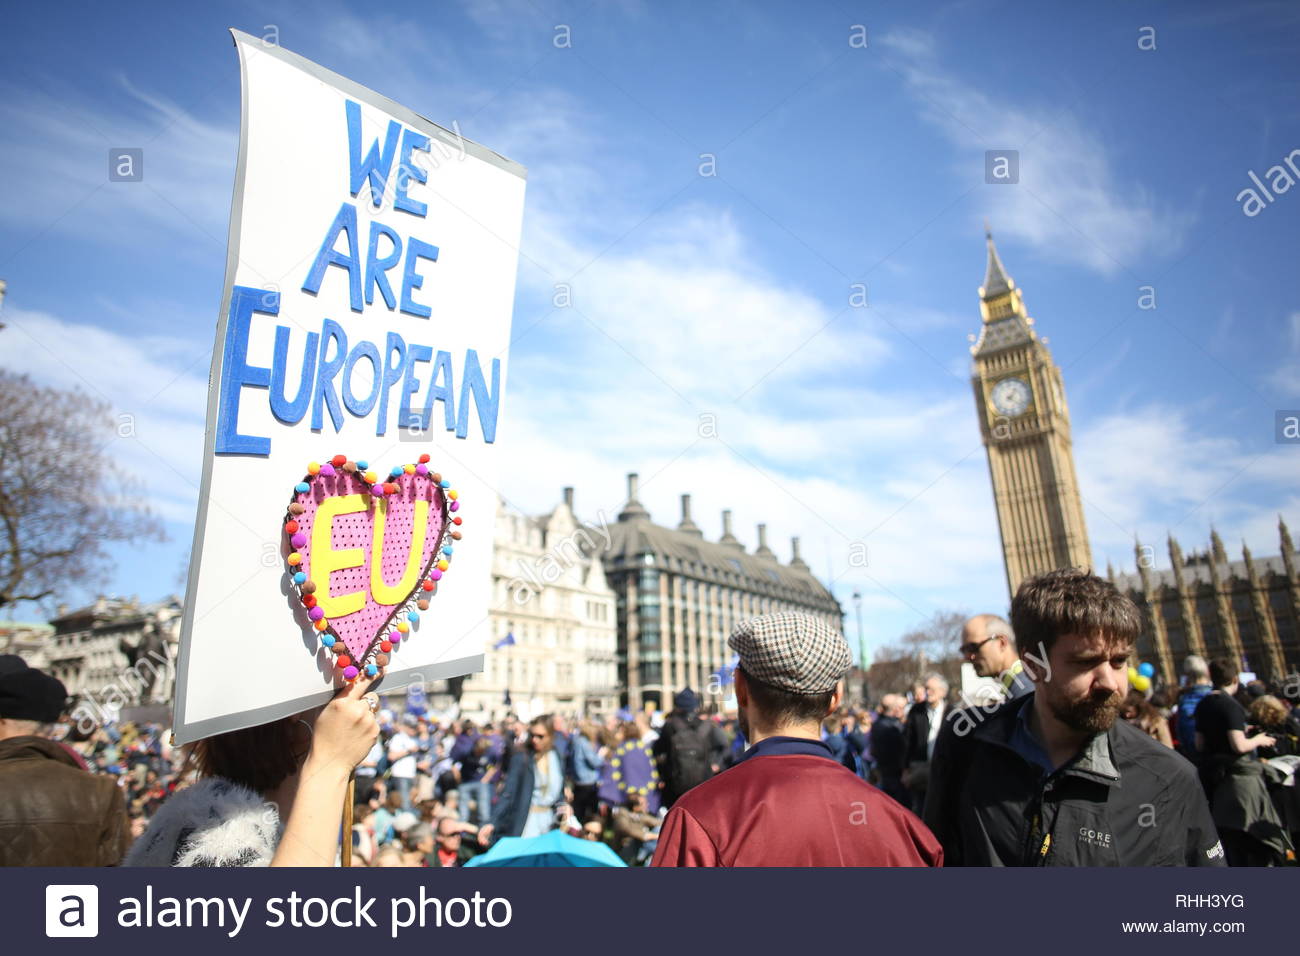 A pro-EU demonstration makes its way towards Westminster as the Brexit controversy rages in the UK Stock Photo